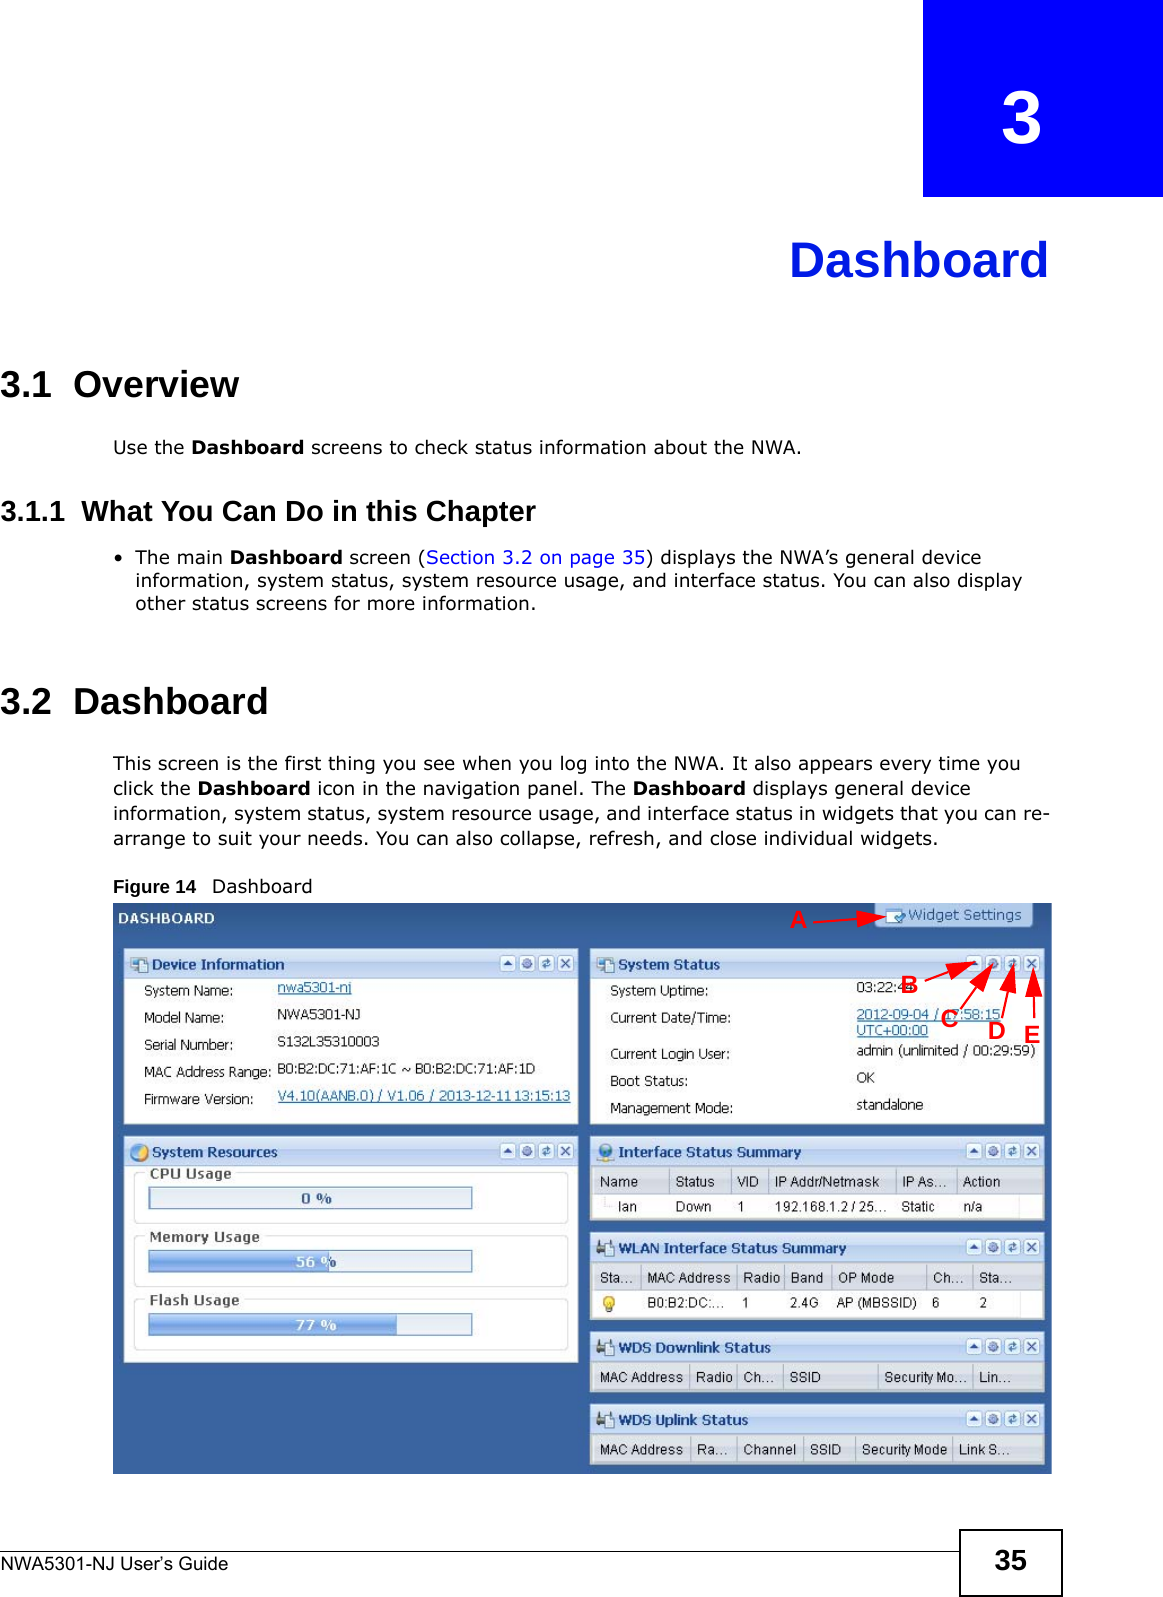 NWA5301-NJ User’s Guide 35CHAPTER   3Dashboard3.1  OverviewUse the Dashboard screens to check status information about the NWA.3.1.1  What You Can Do in this Chapter•The main Dashboard screen (Section 3.2 on page 35) displays the NWA’s general device information, system status, system resource usage, and interface status. You can also display other status screens for more information.3.2  Dashboard  This screen is the first thing you see when you log into the NWA. It also appears every time you click the Dashboard icon in the navigation panel. The Dashboard displays general device information, system status, system resource usage, and interface status in widgets that you can re-arrange to suit your needs. You can also collapse, refresh, and close individual widgets.Figure 14   Dashboard  BCDEA